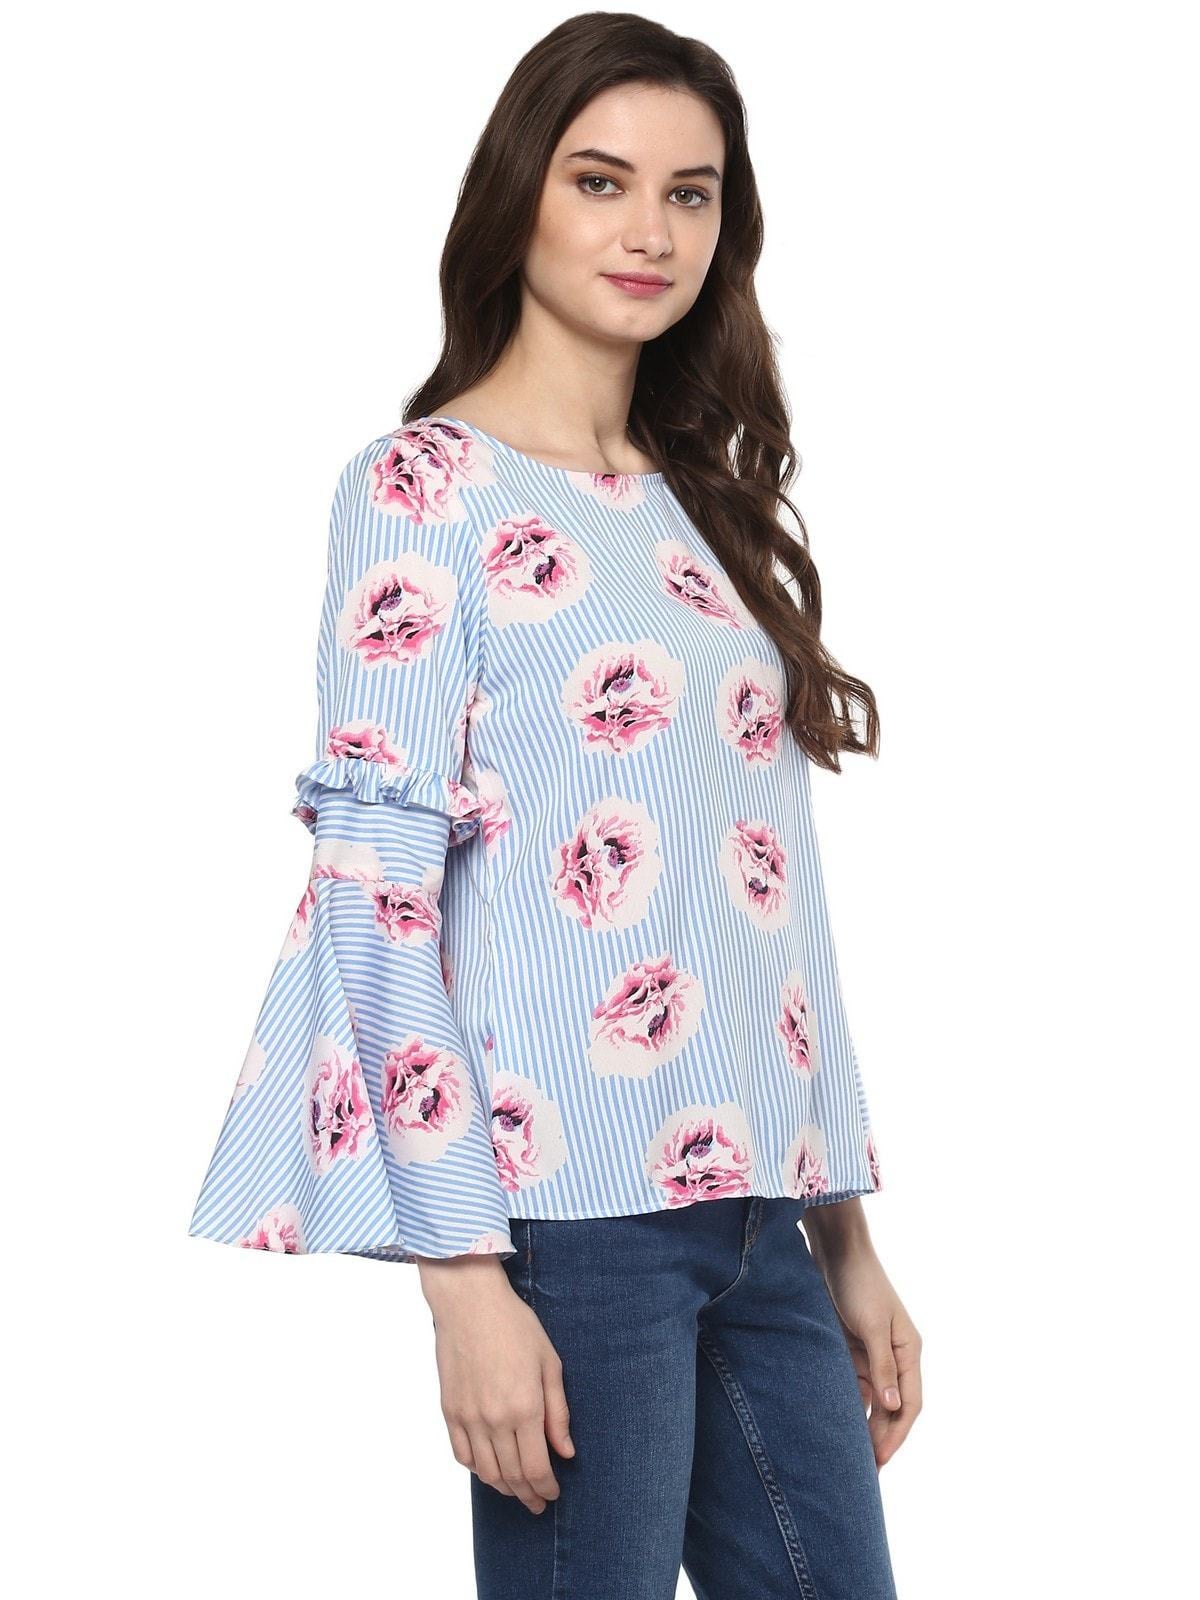 Women's Striped Floral Top - Pannkh